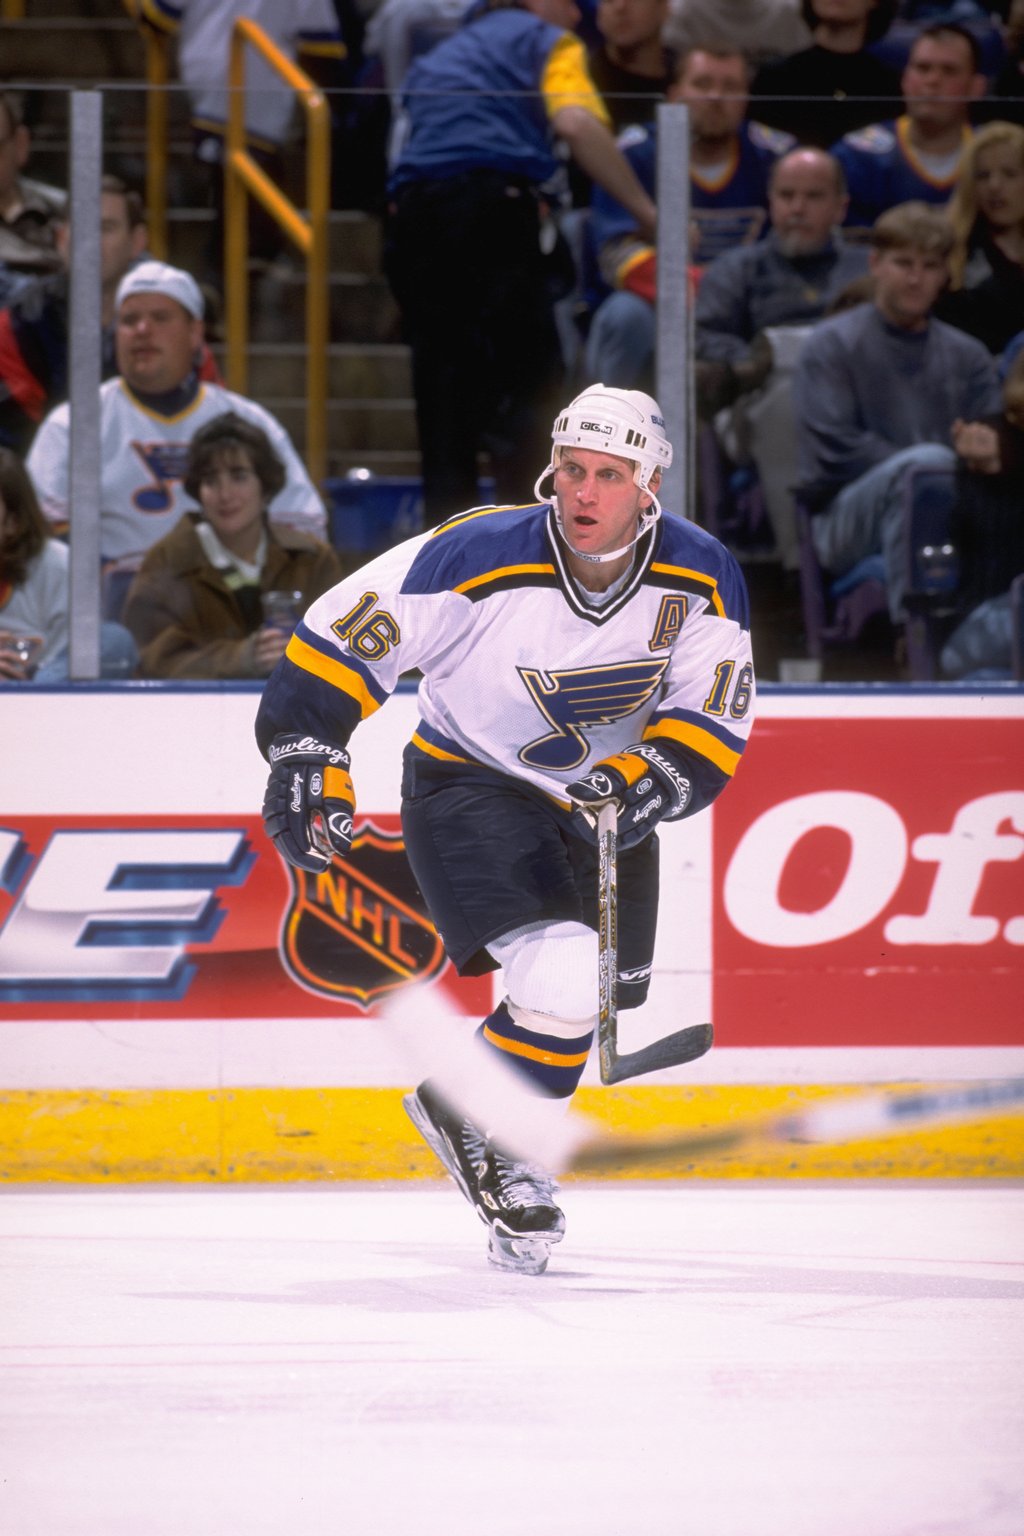 Brett Hull of the St. Louis Blues in action during a game against